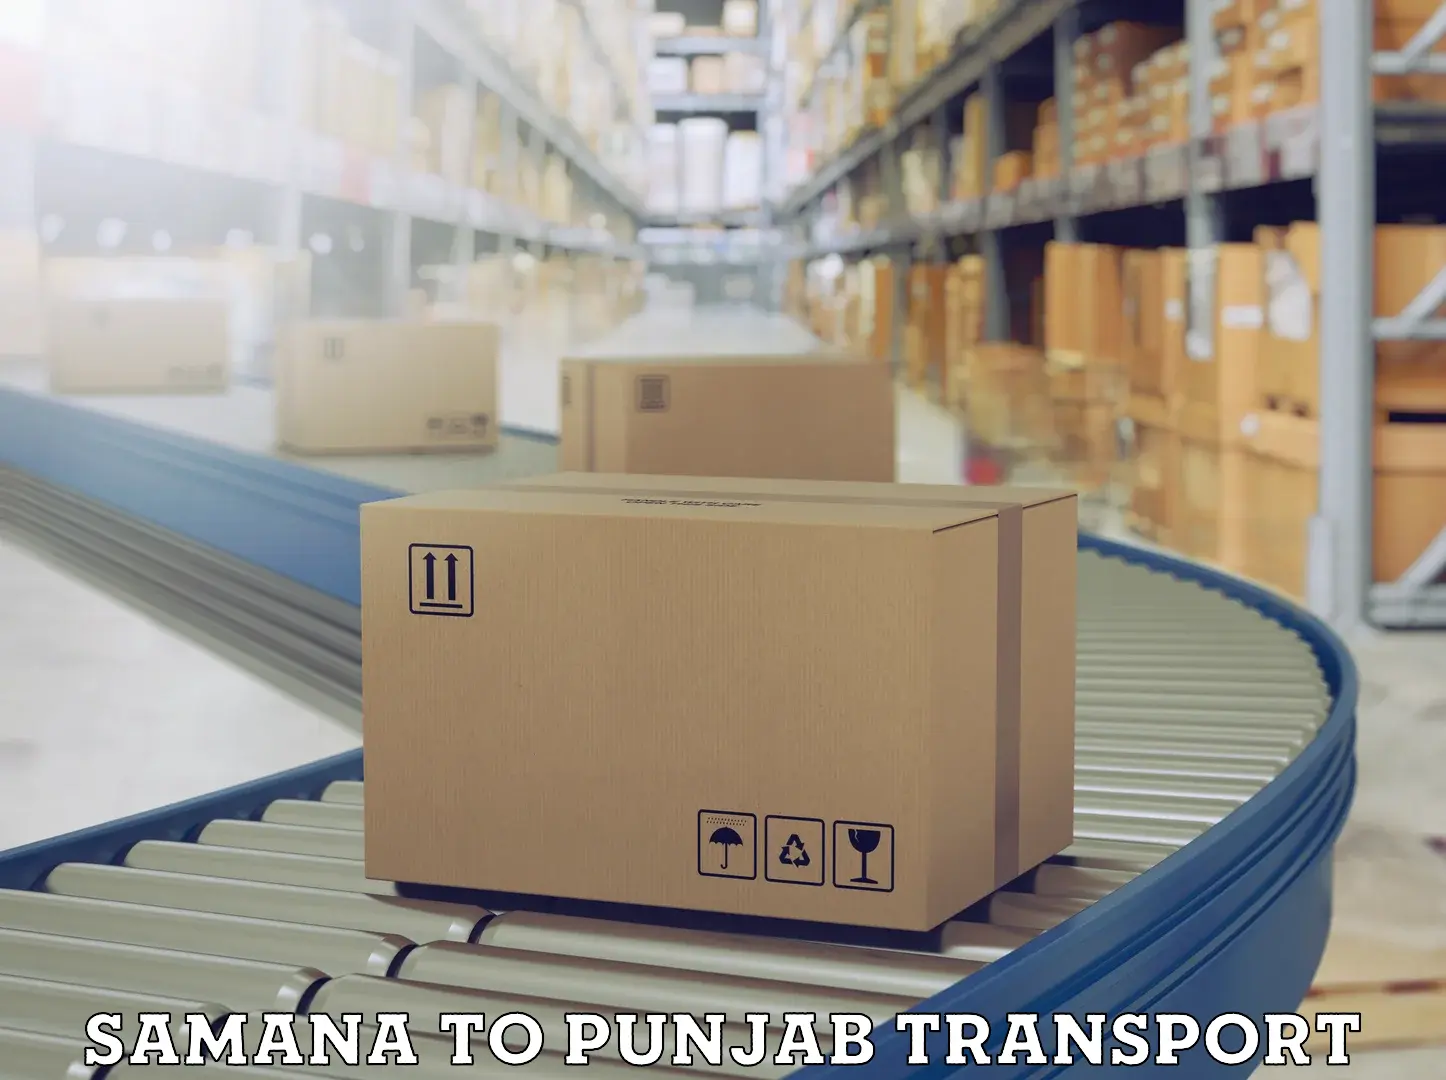 Transport bike from one state to another Samana to Punjab